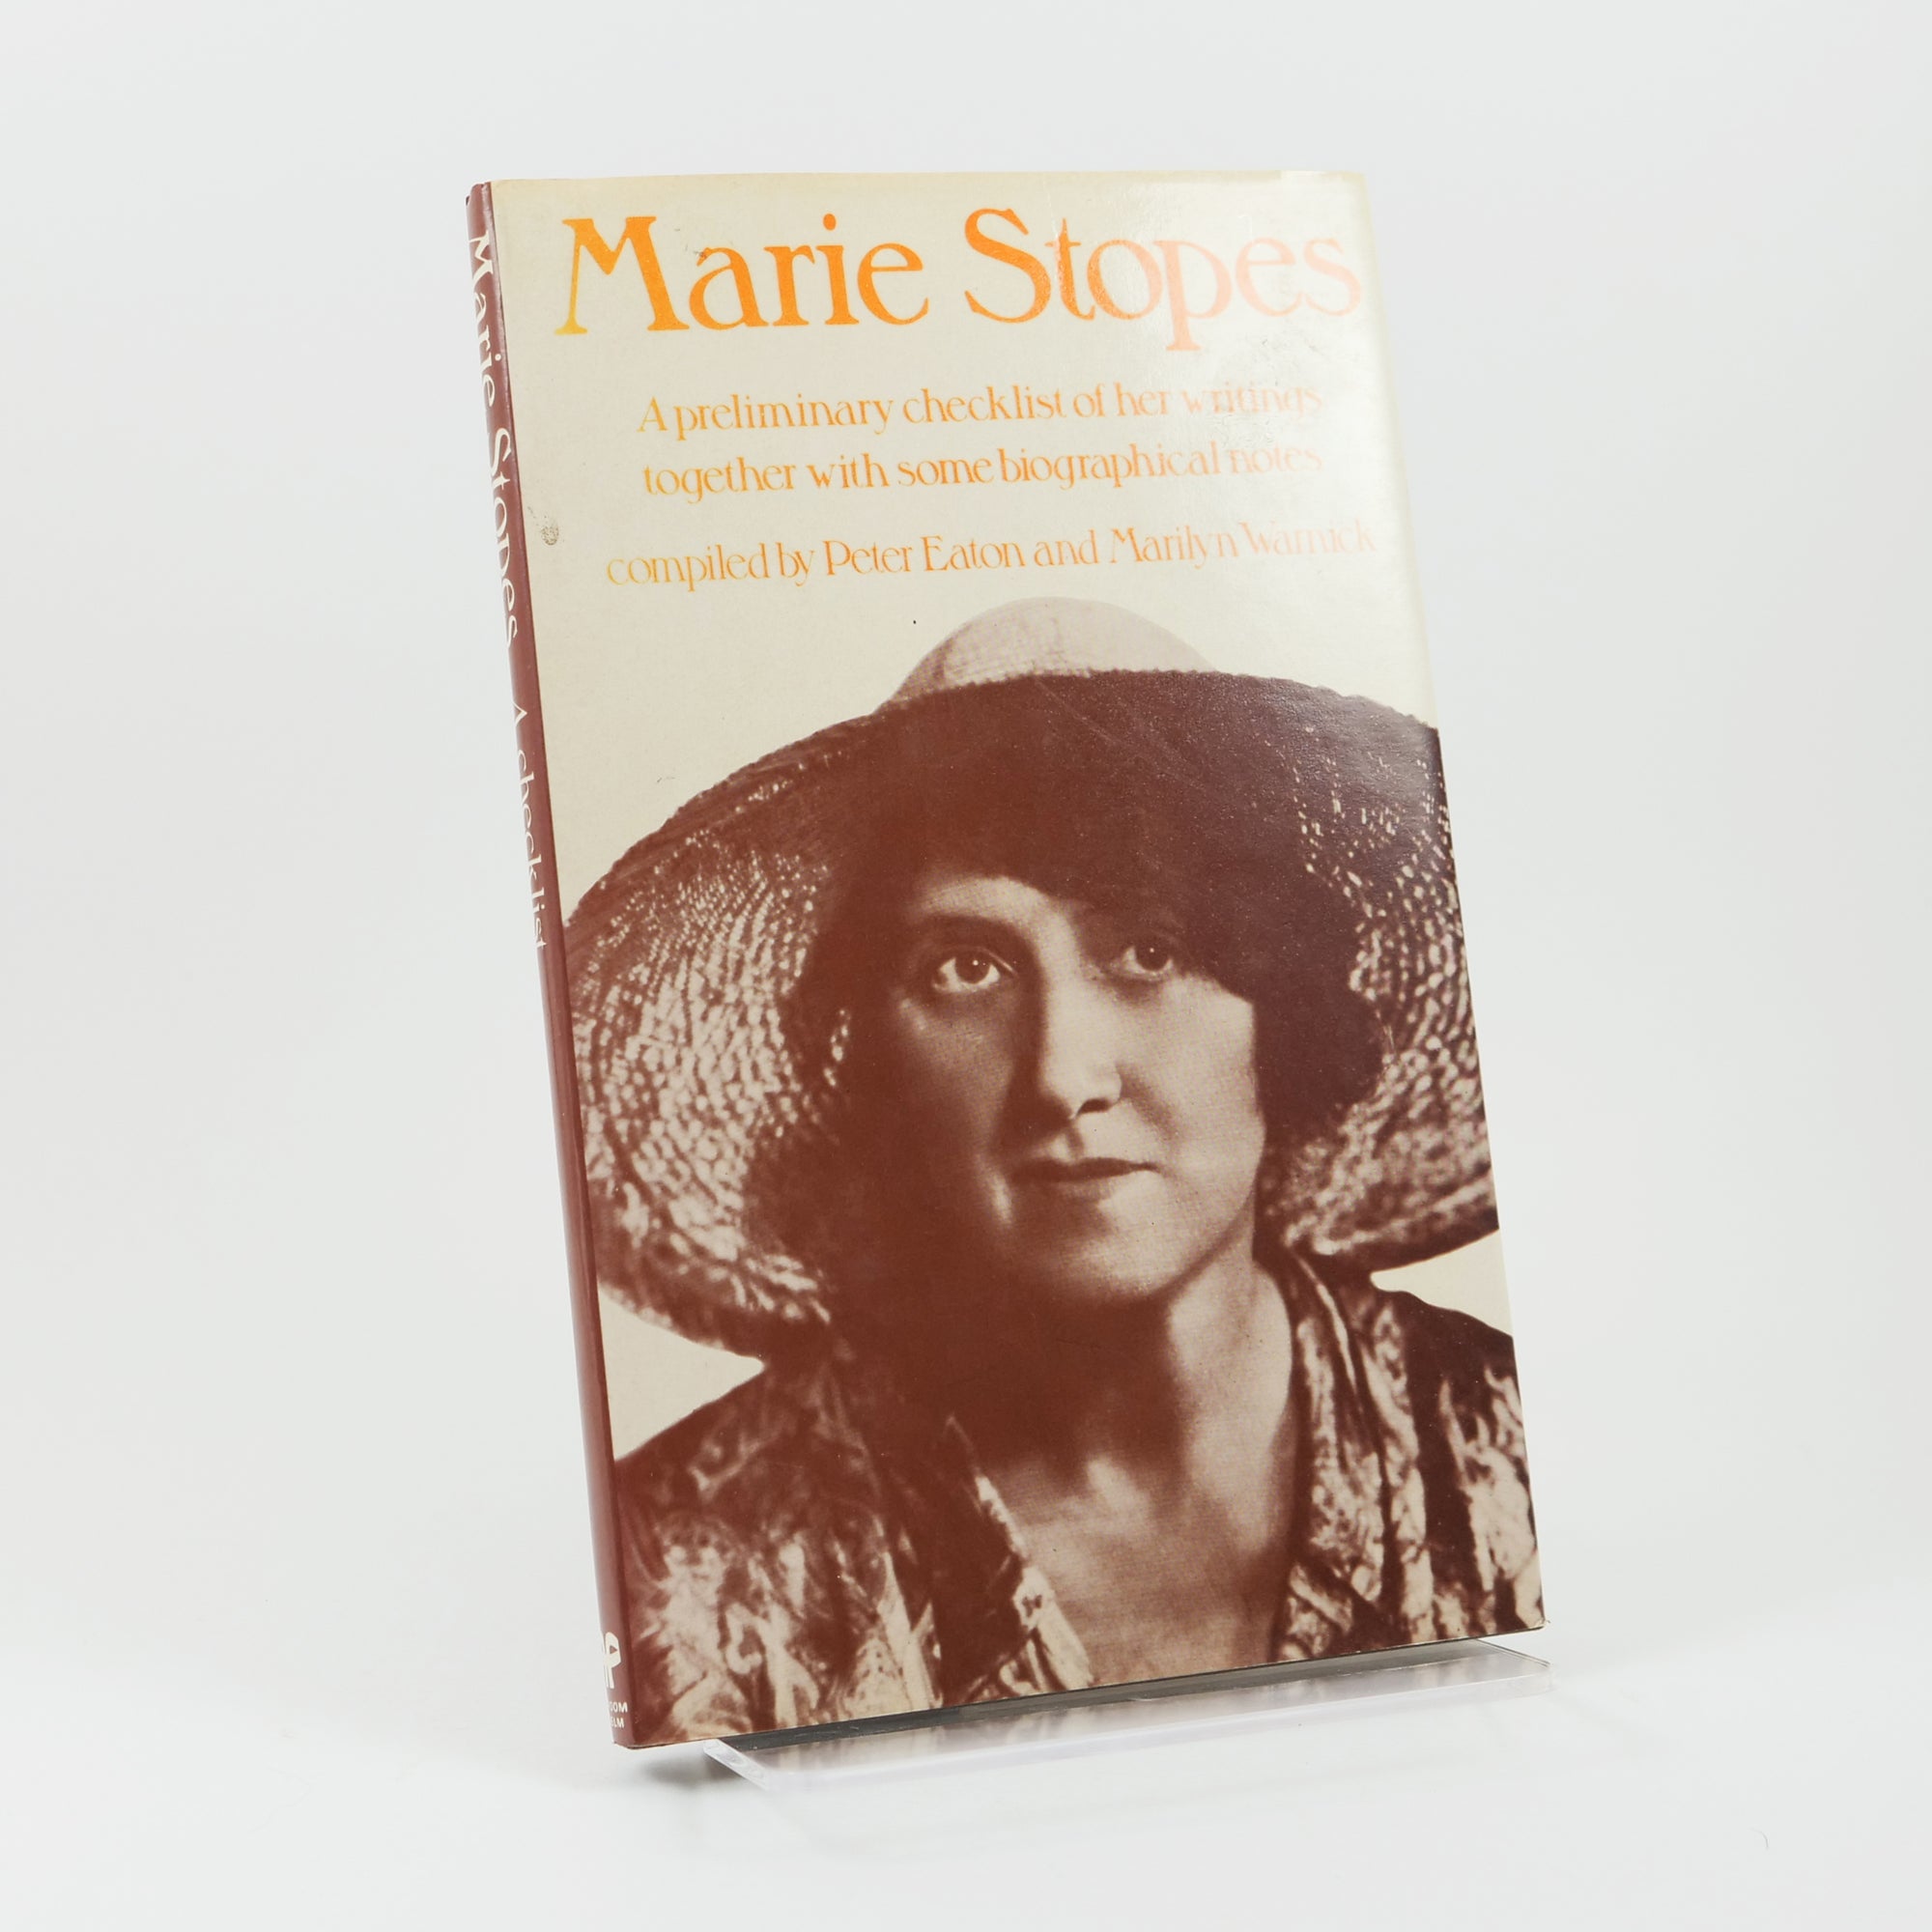 (Stopes, Marie C.) Eaton, Peter & Marilyn Warnick | Marie Stopes. A Checklist of Her Writings.